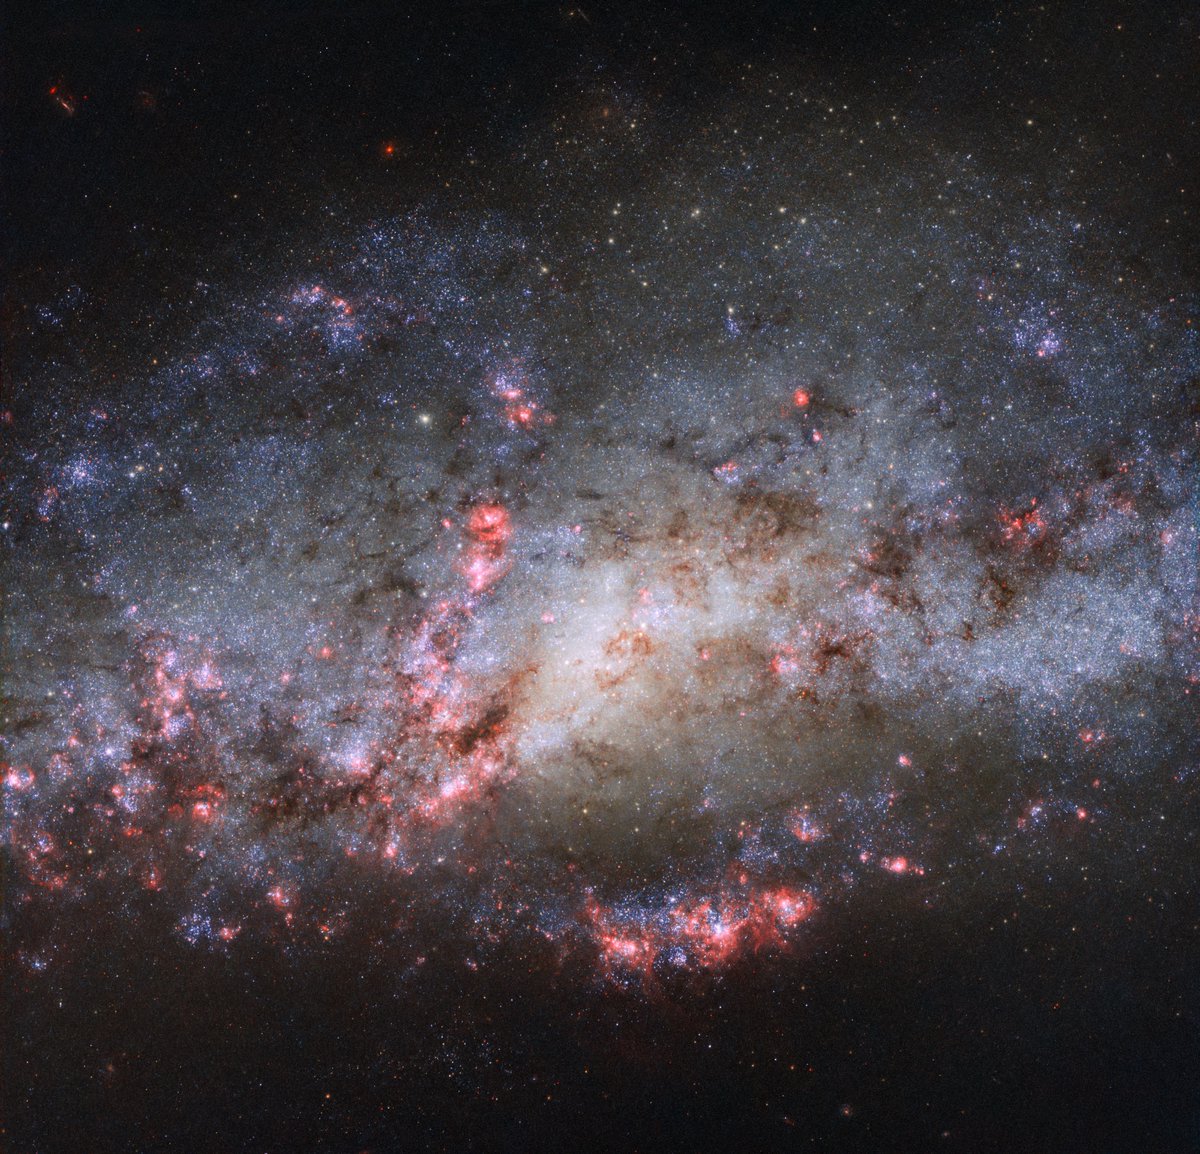 This hot mess is NGC 4490. Once a barred spiral galaxy, it was deformed by a collision with nearby NGC 4485. The pair are entry 269 in Halton Arp's "Atlas of Peculiar Galaxies."Image: ESA/Hubble/NASA, D. Calzetti (UMass)/LEGUS Team, J. Maund (U Sheffield), R. Chandar (U Toledo)